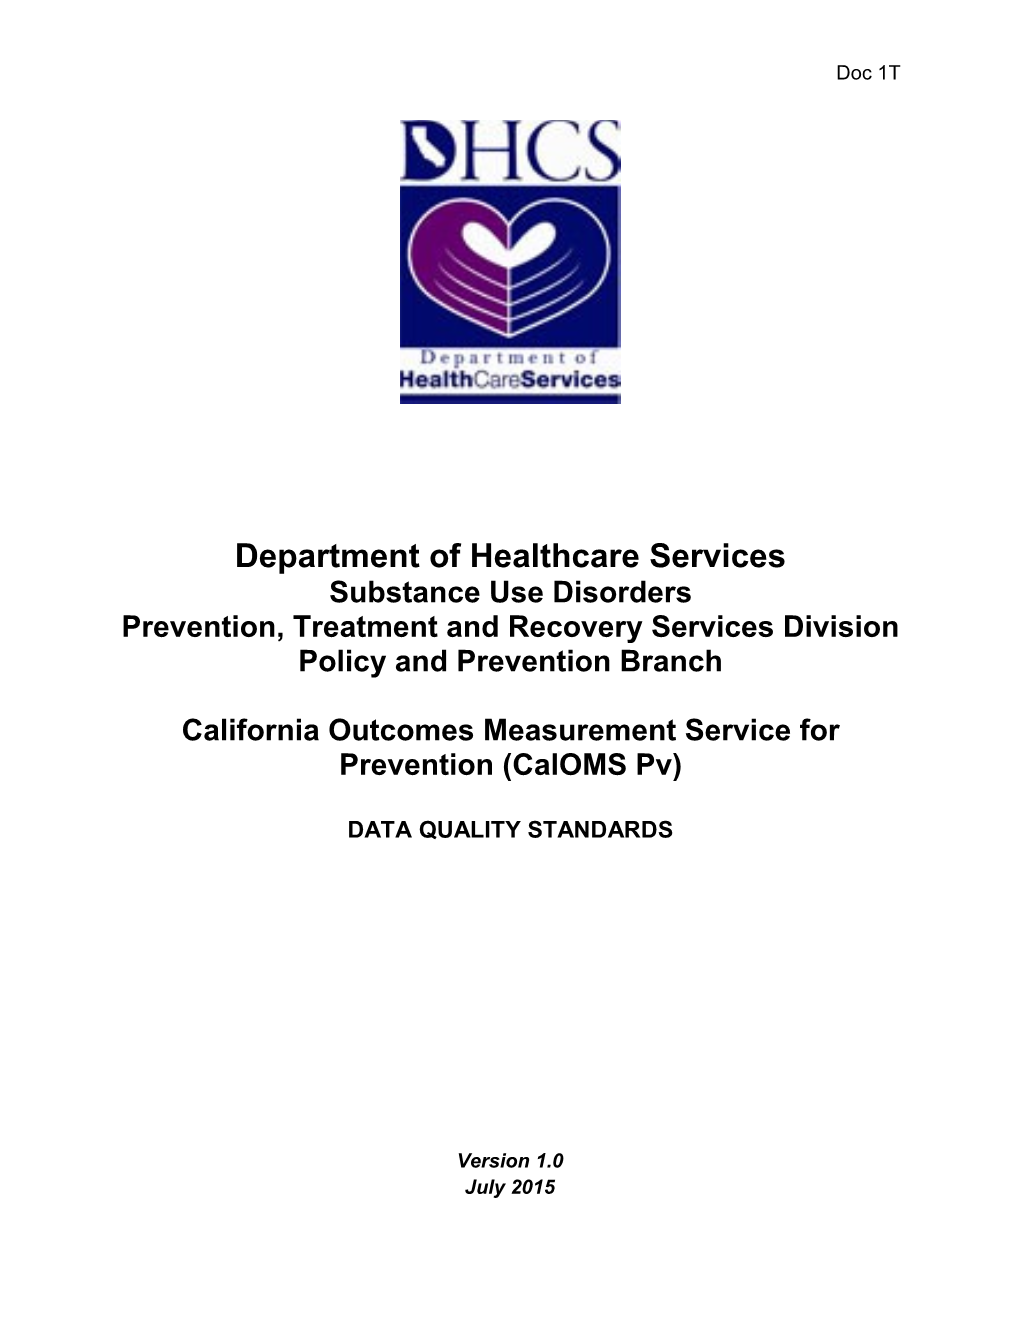 Prevention, Treatment and Recovery Services Division